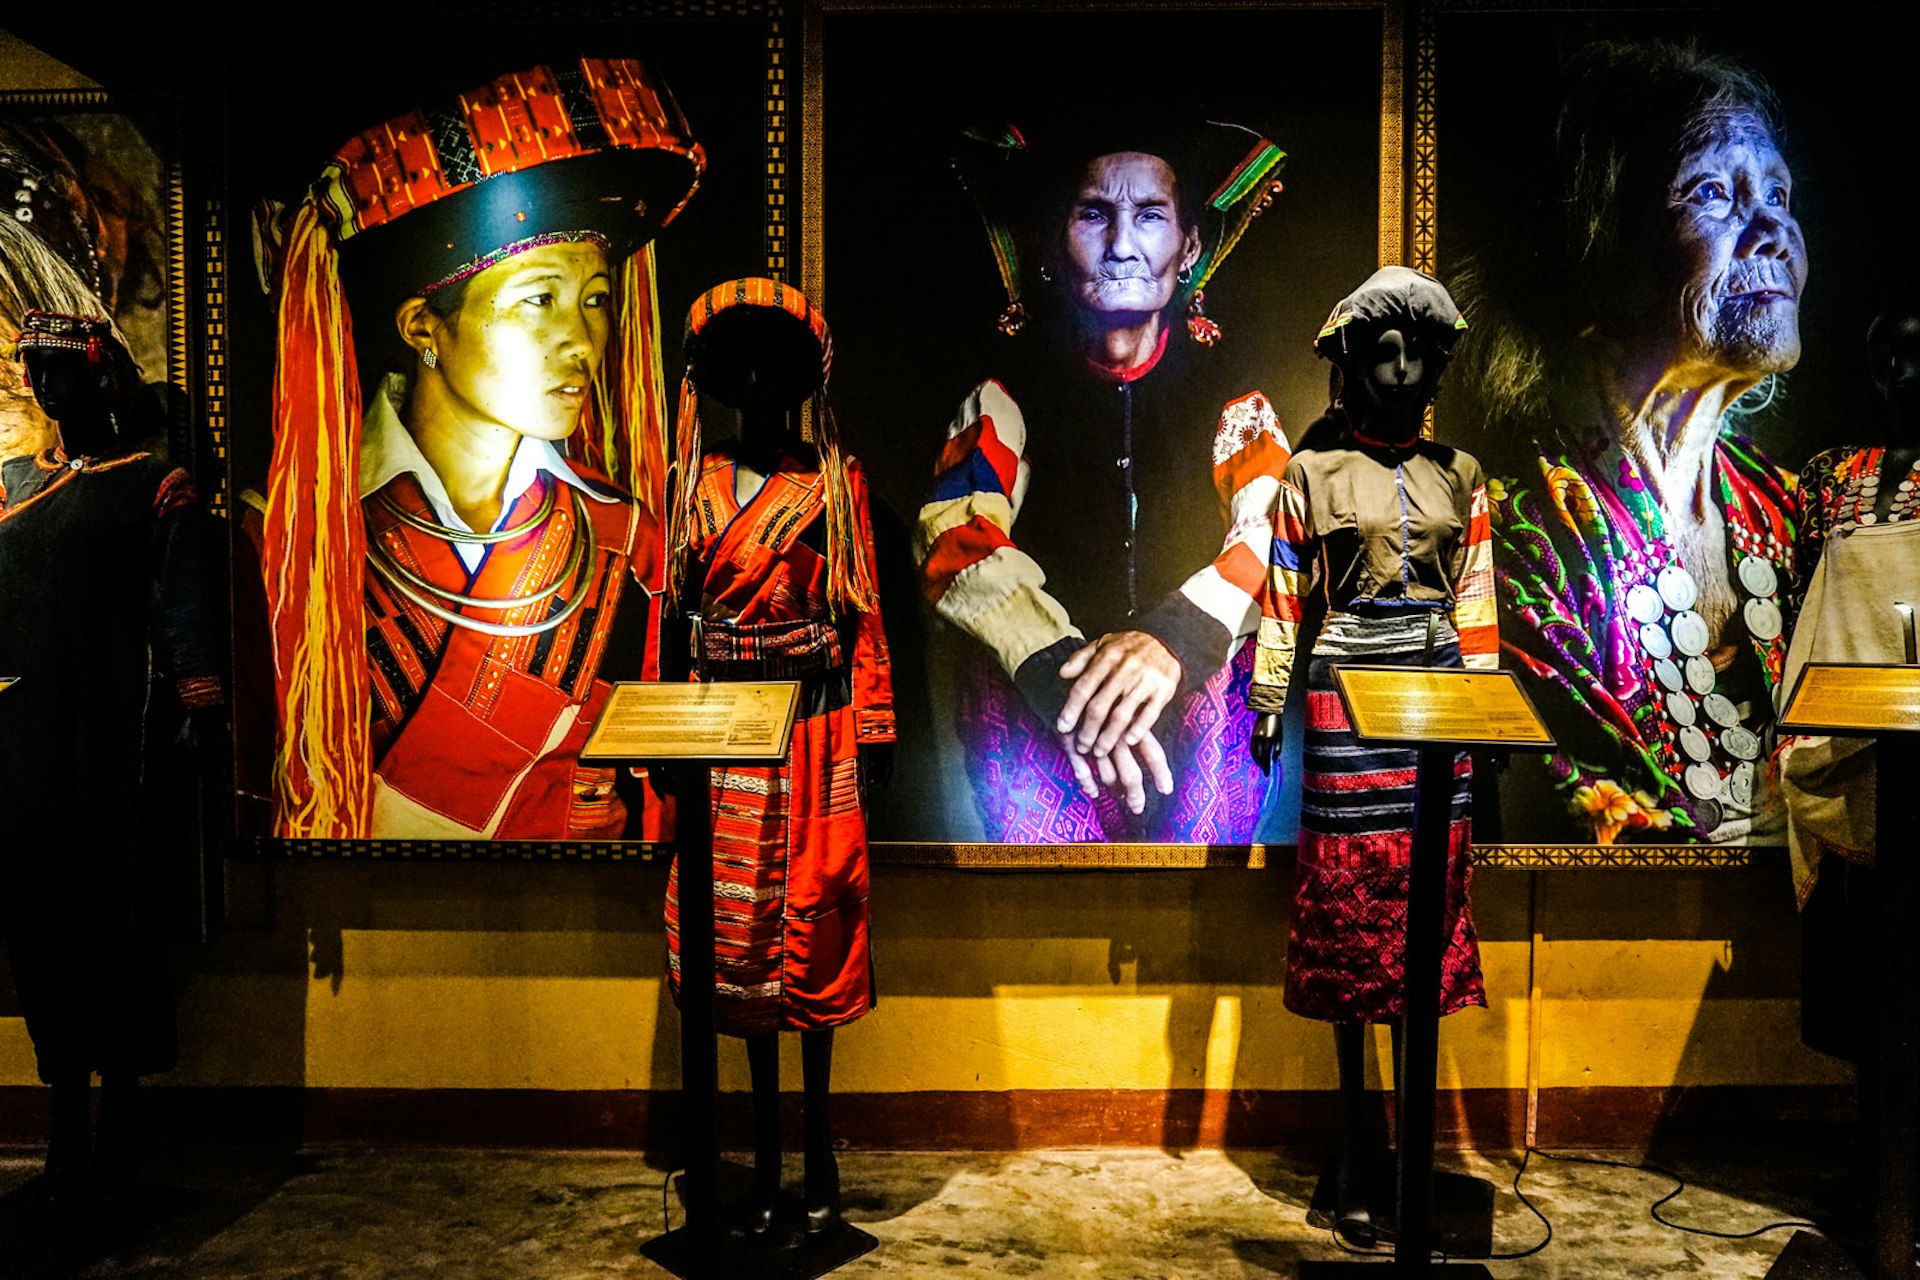 Two mannequins wearing traditional clothing stand in front of three large portraits of women in similar traditional clothing